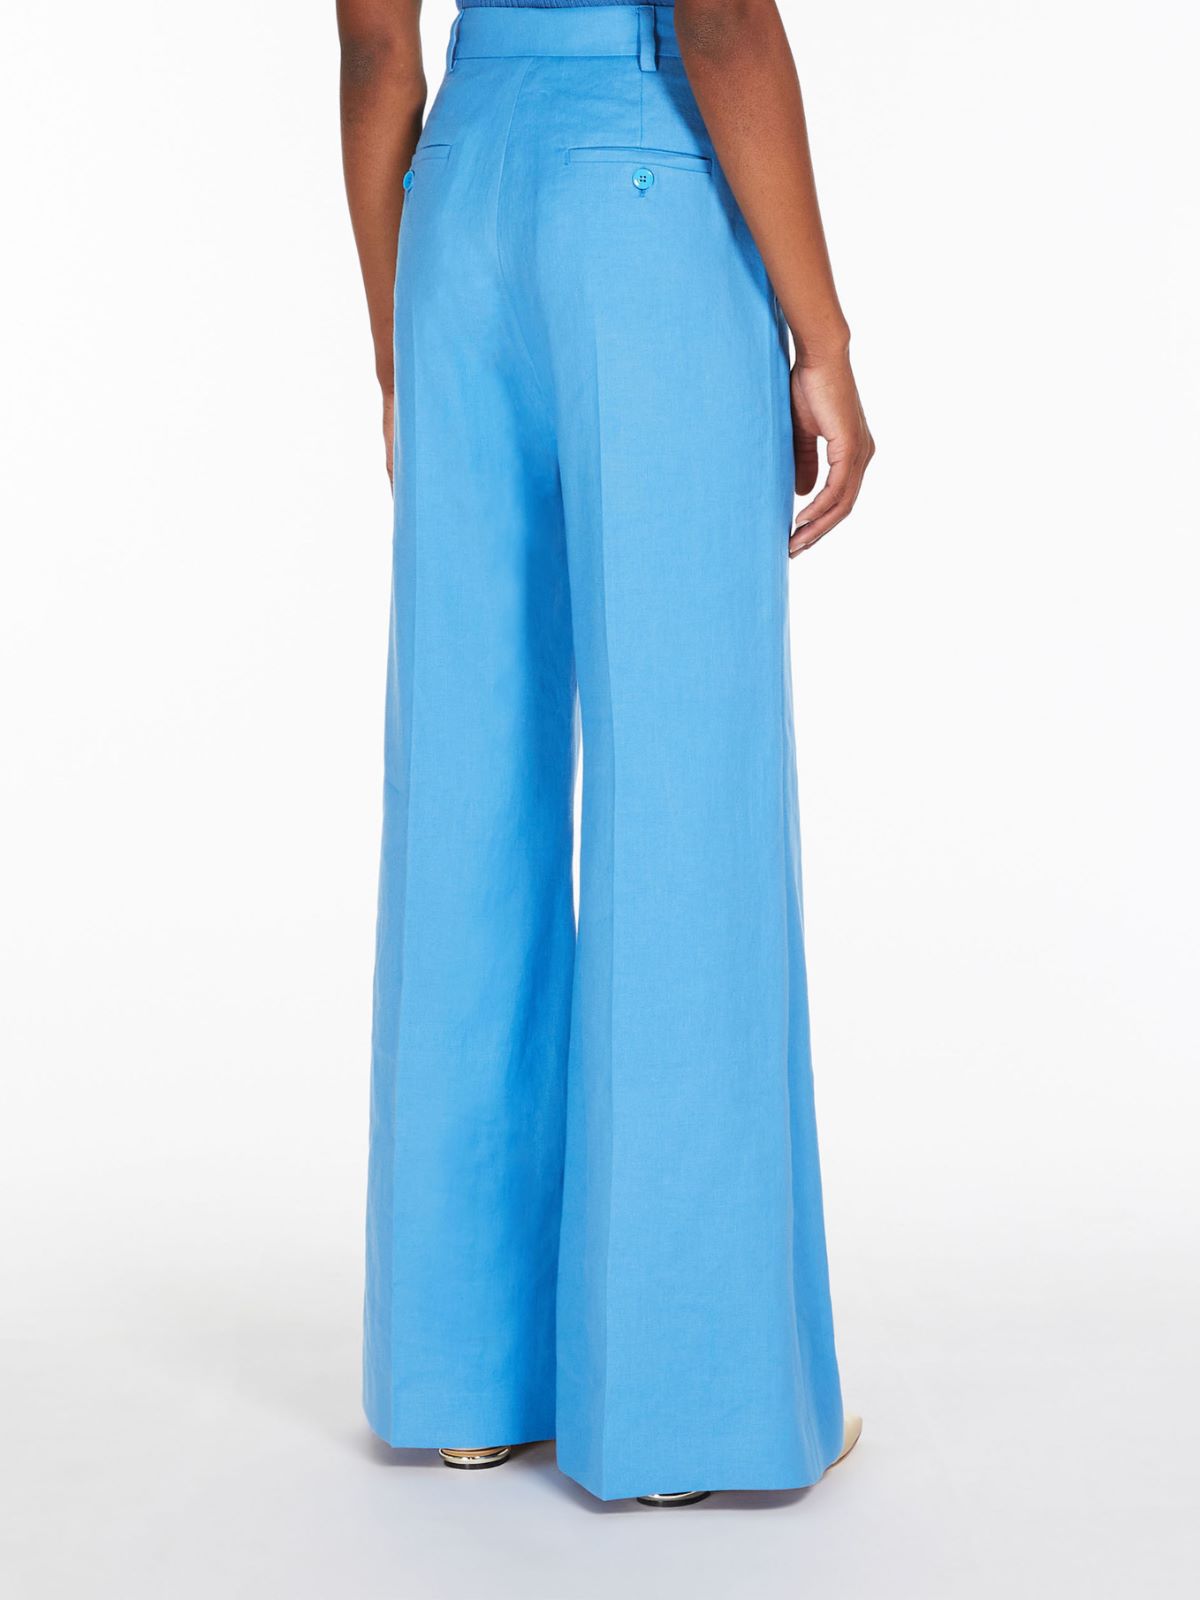 Linen and cotton trousers - LIGHT BLUE - Weekend Max Mara - 3